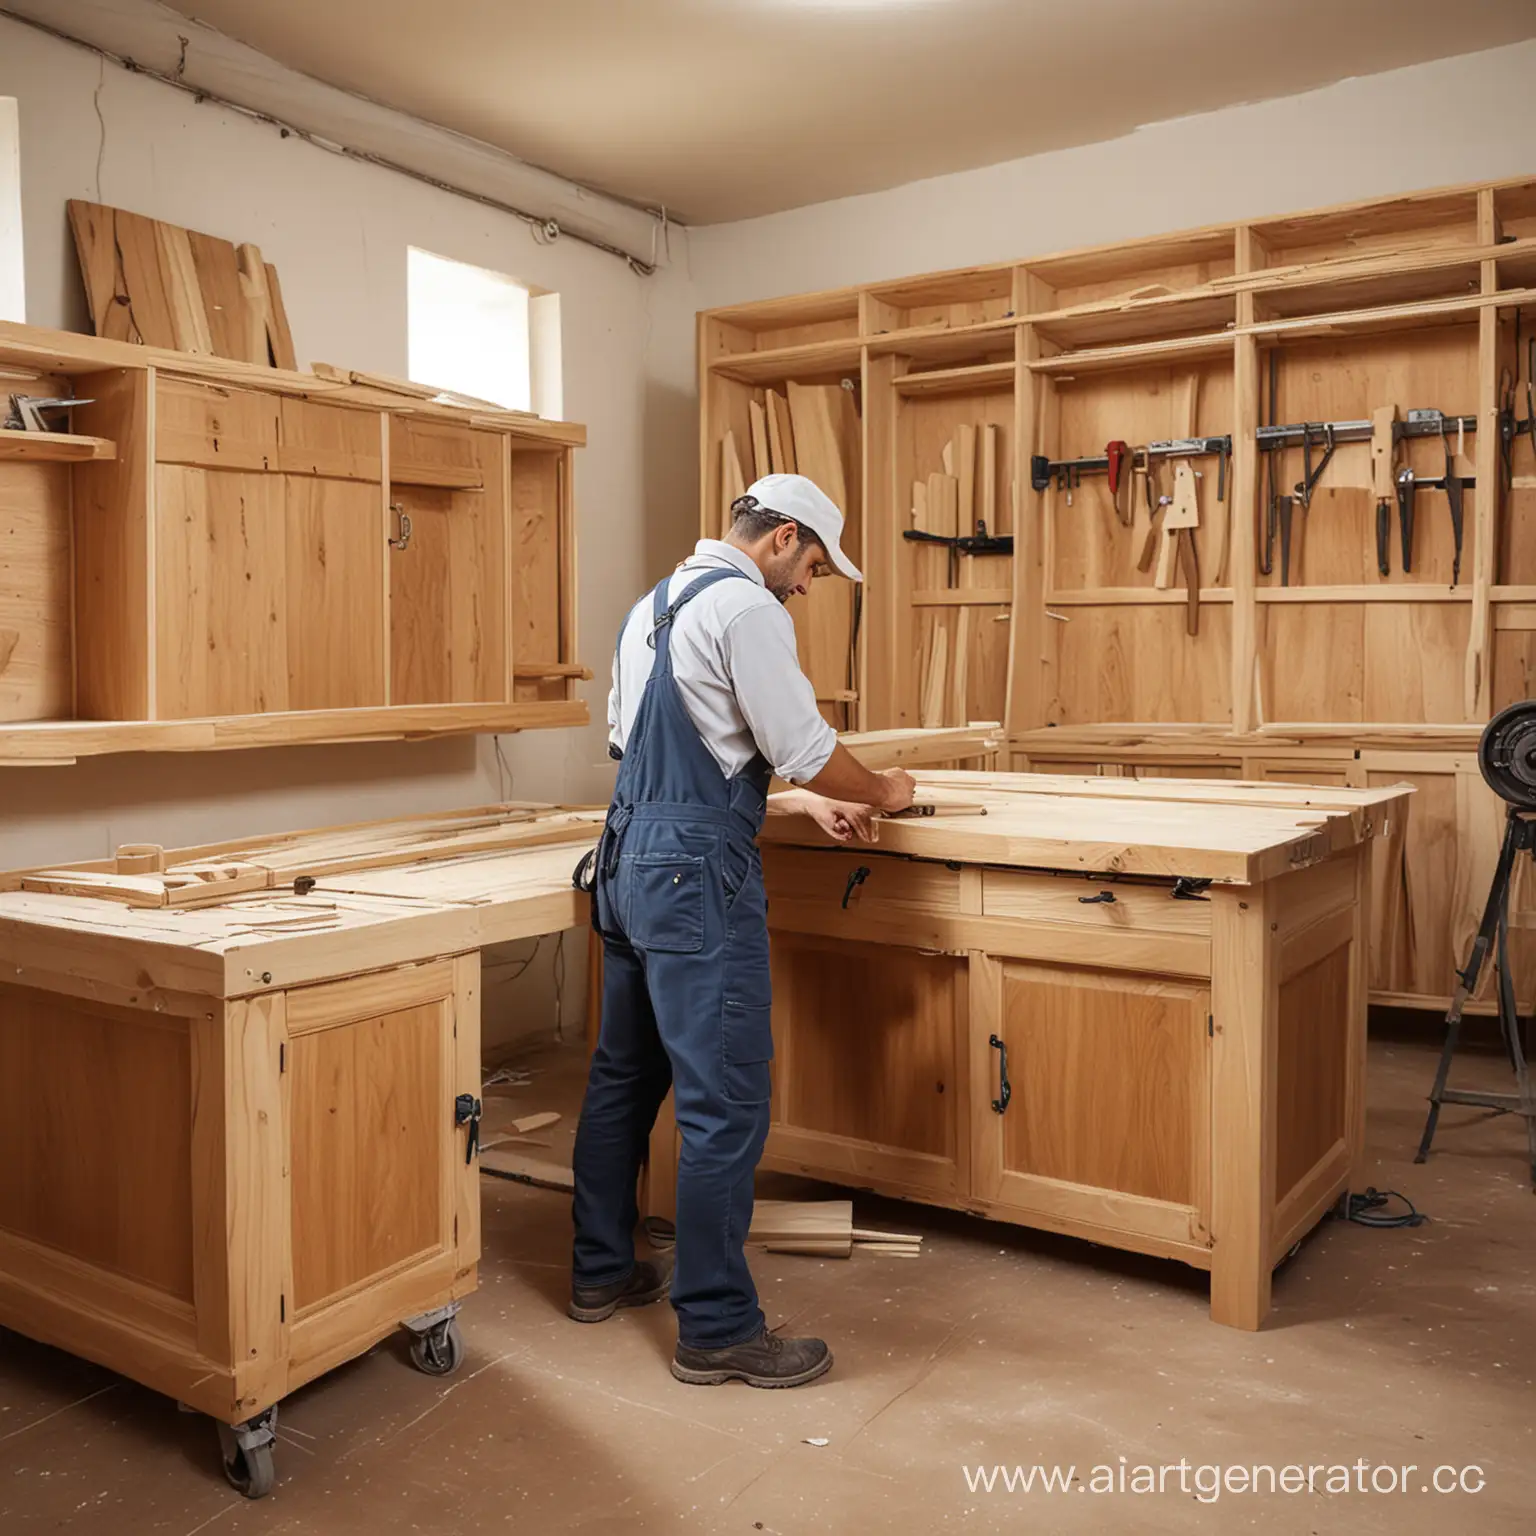 generate a worker at a wood machine in rooms of Arab appearance who makes a large cabinet